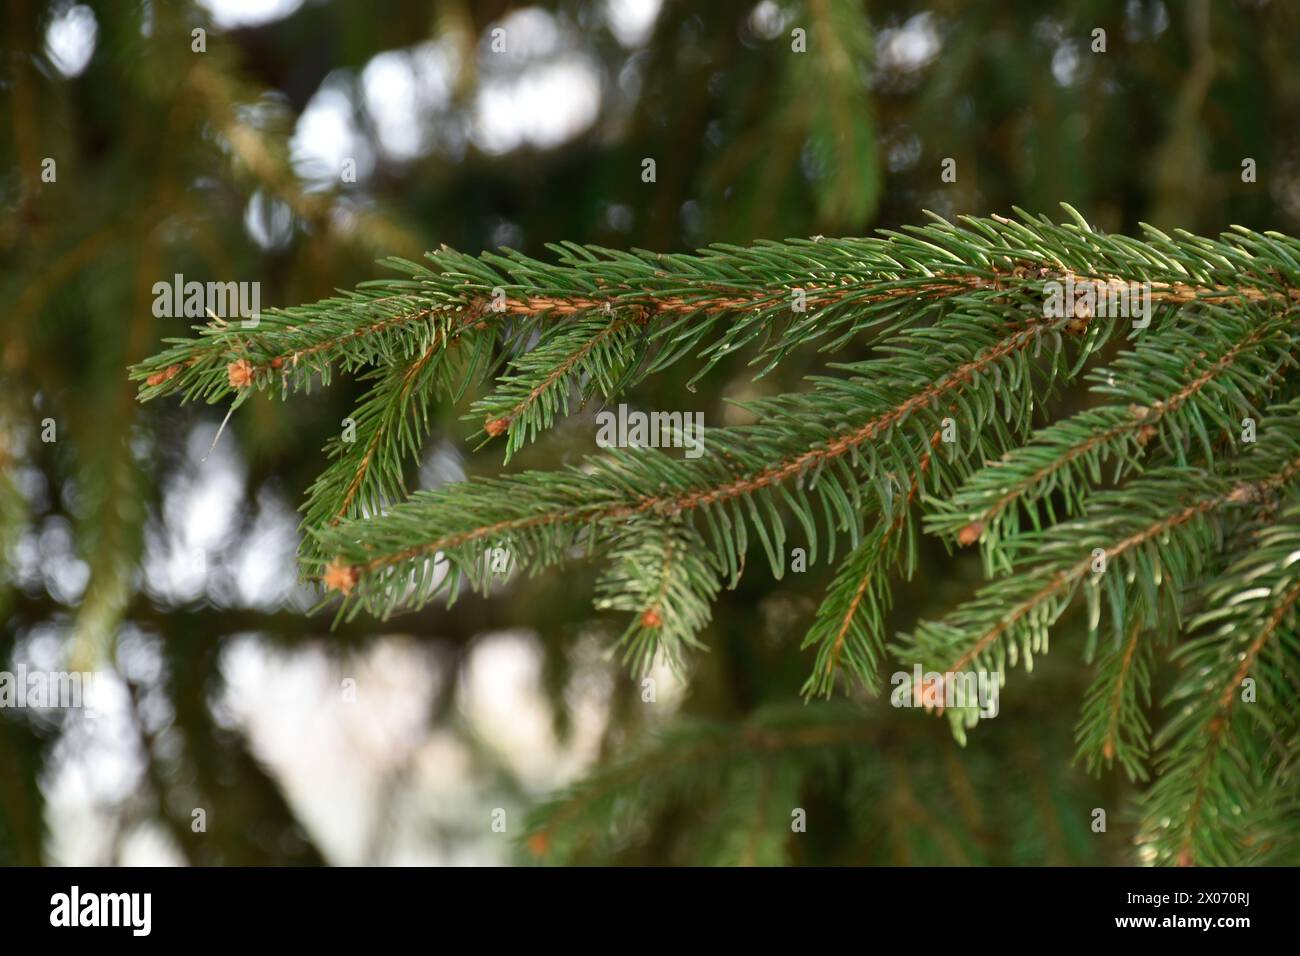 Fir tree with cones, conifer tree branches, early spring nature, fir needles, evergreen tree, spruce, coniferous forest, sunlight. Stock Photo